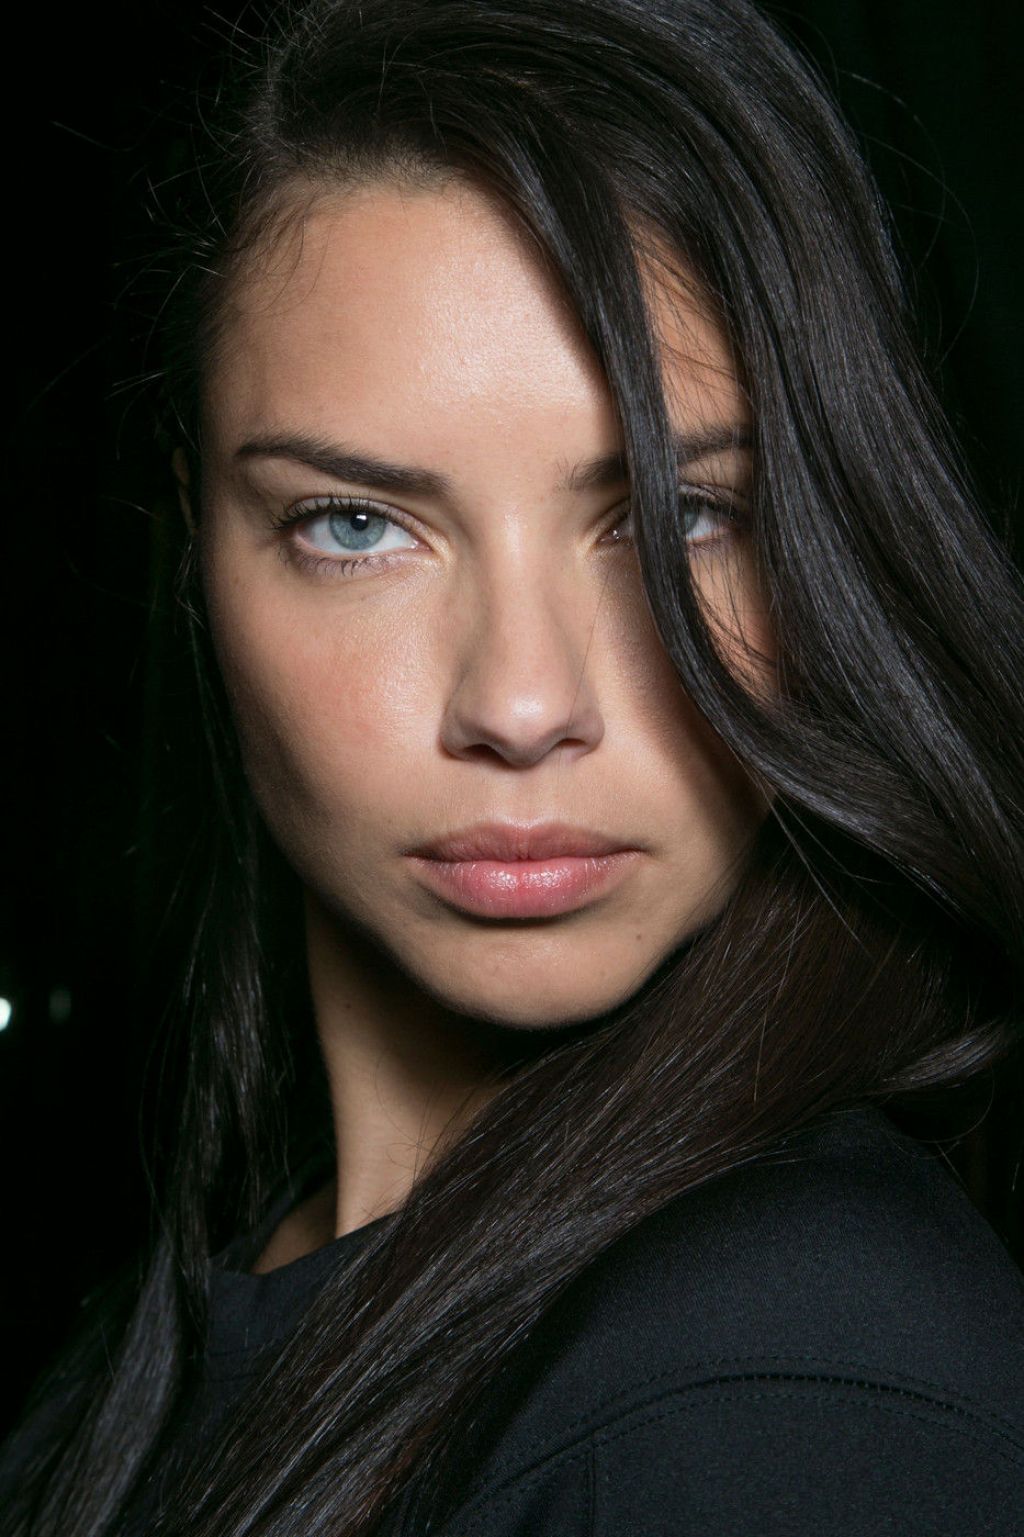 Adriana Lima Backgrounds, Compatible - PC, Mobile, Gadgets| 1024x1537 px